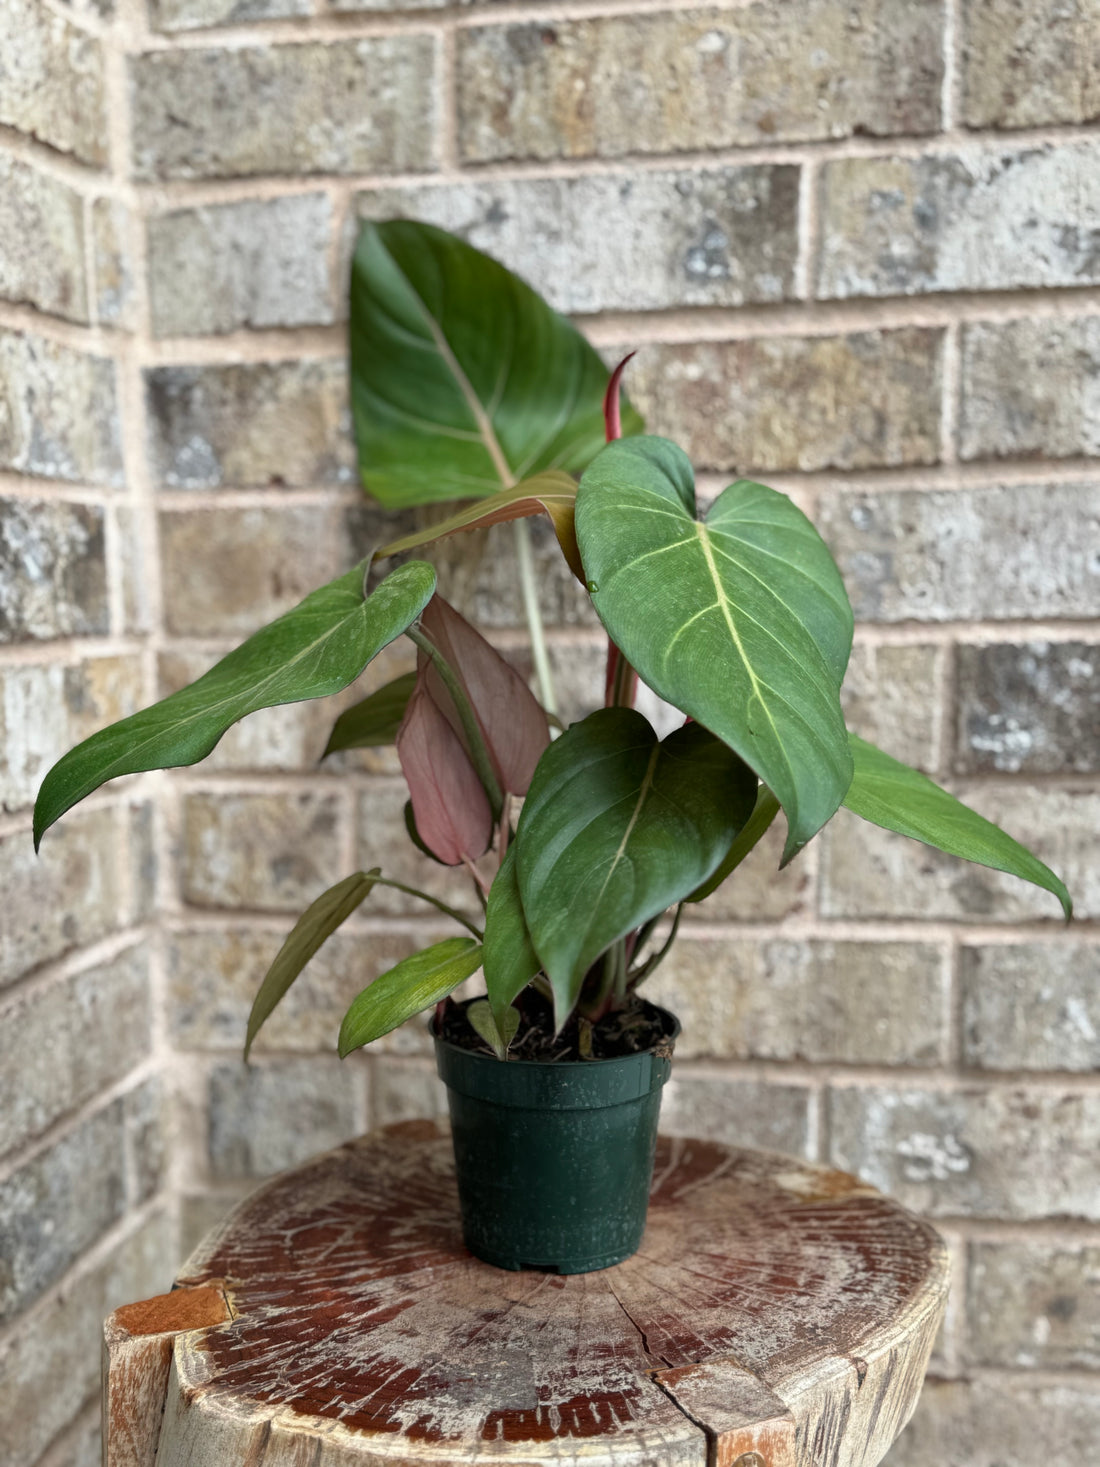 6” Philodendron Summer Glory